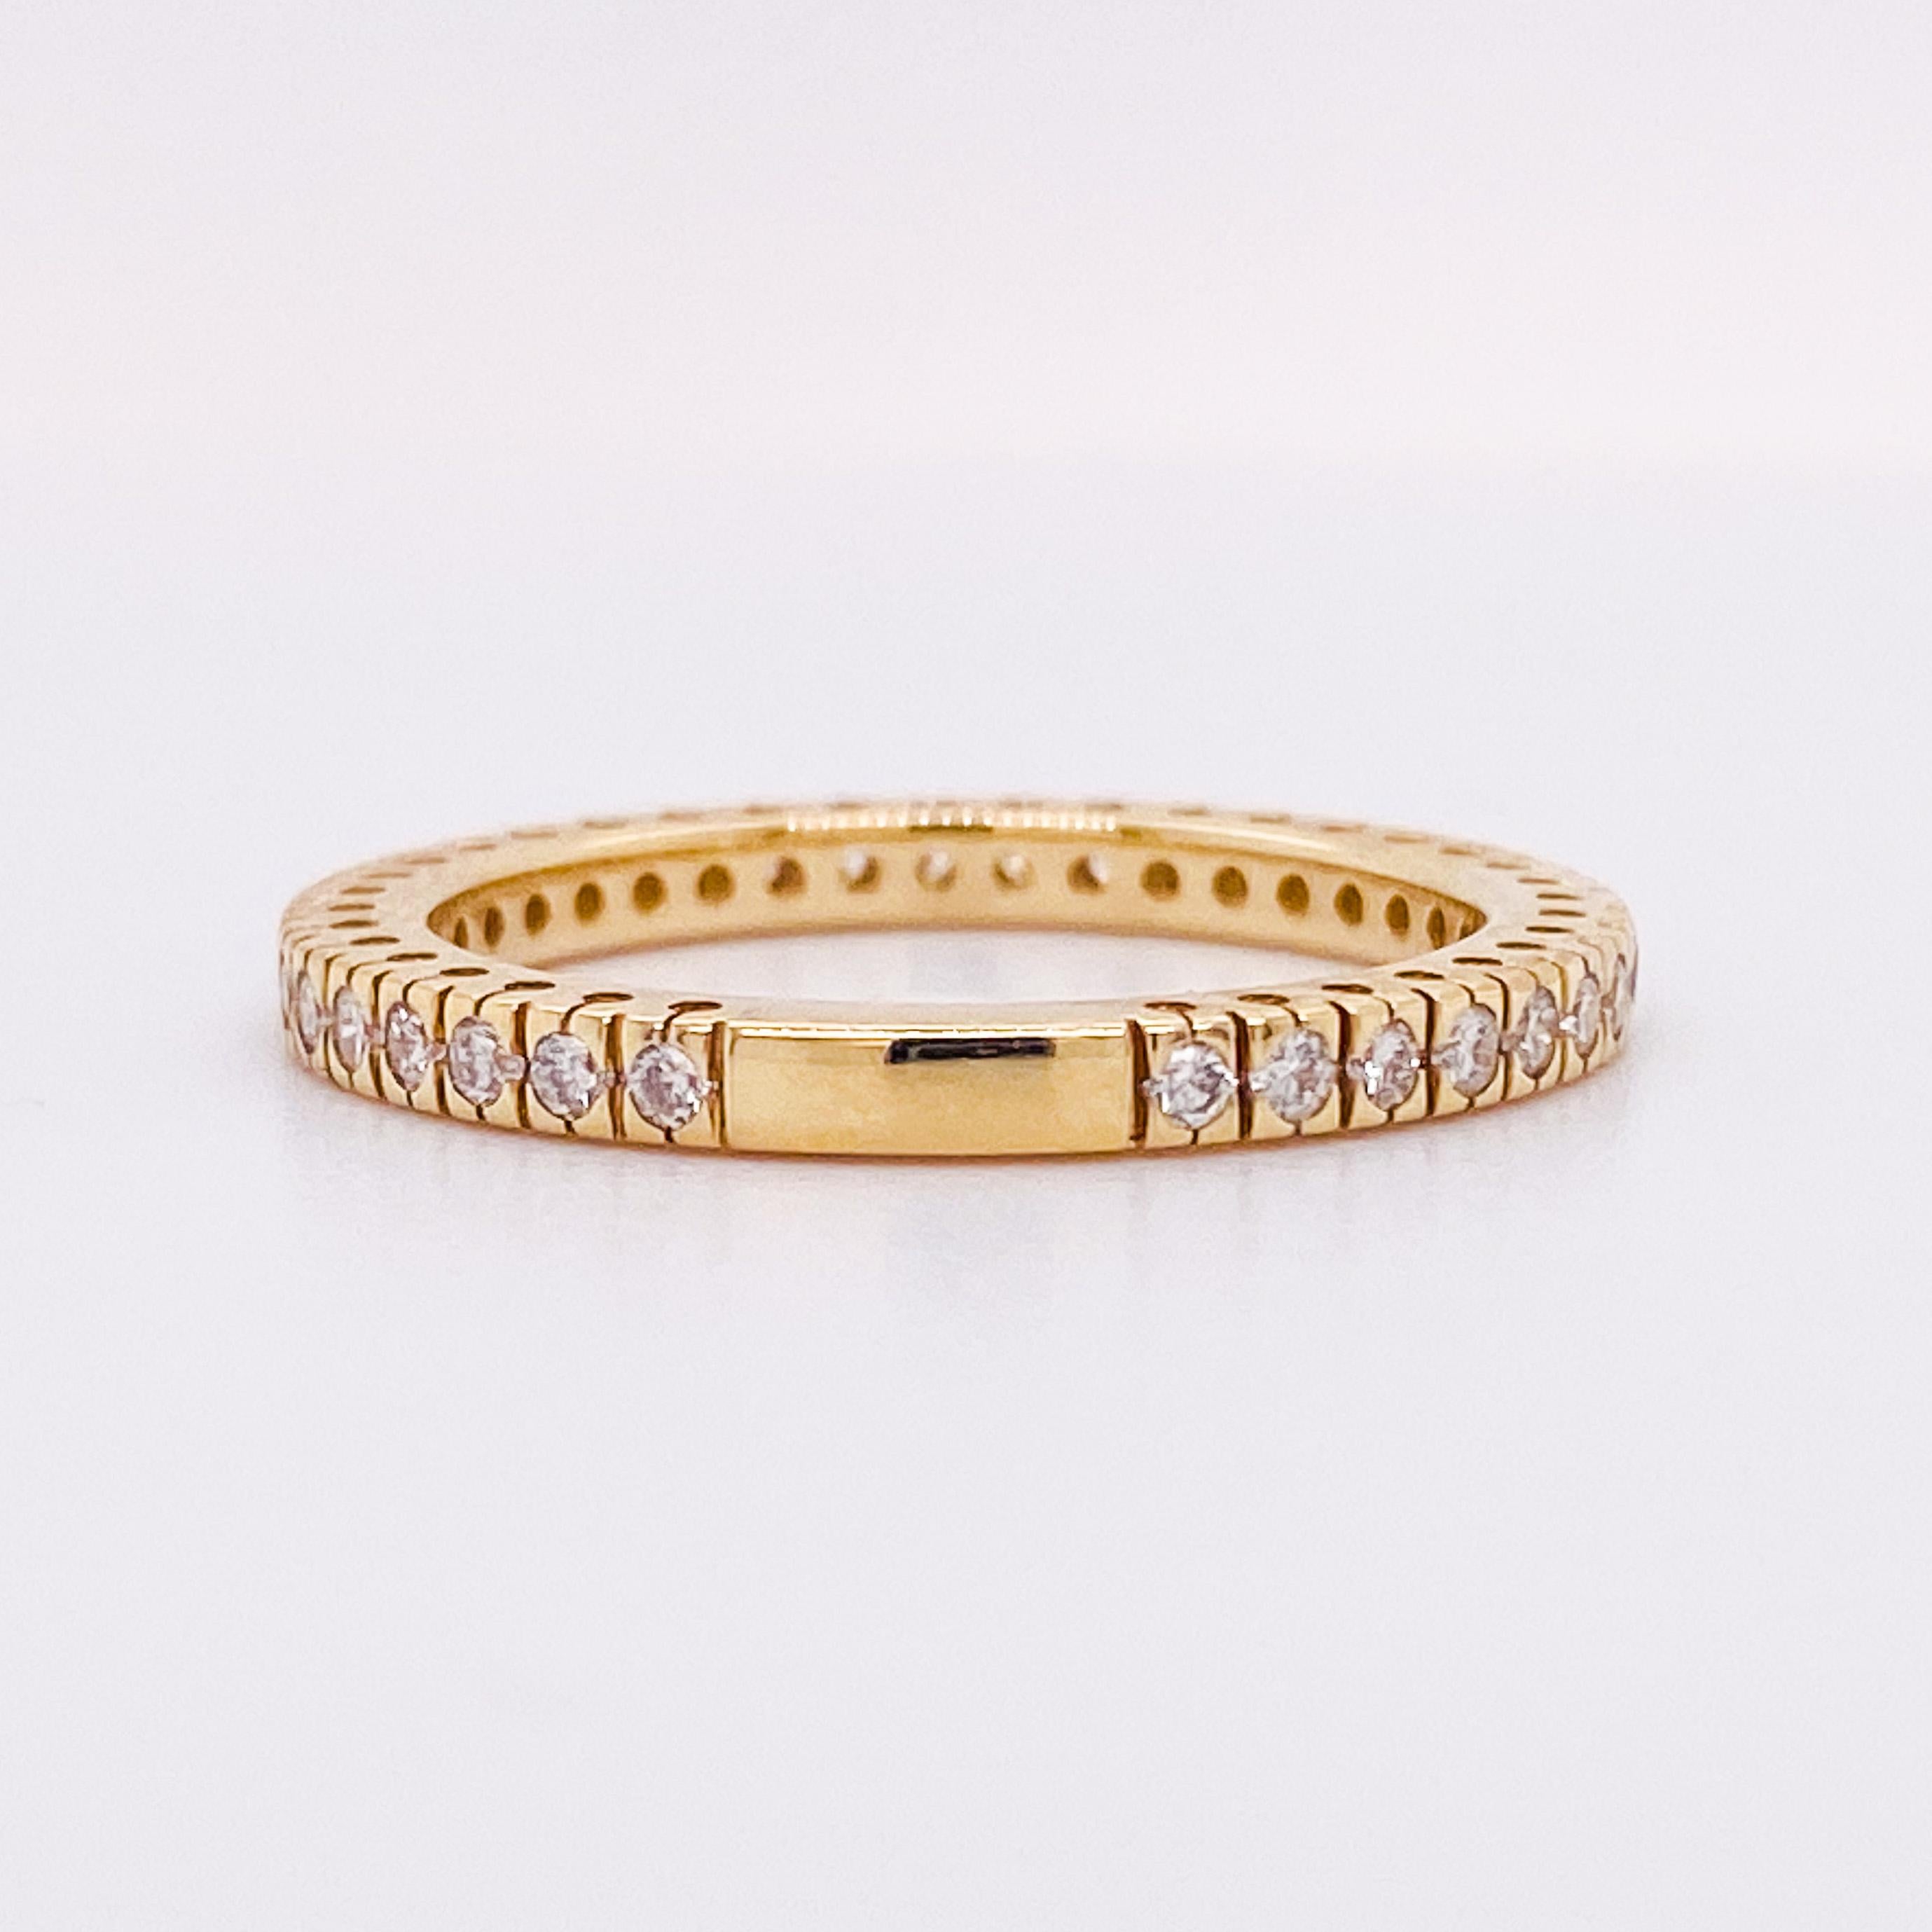 For Sale:  Diamond Stackable Band in 14k Yellow Gold .42 Carat Round Diamond Ring 3